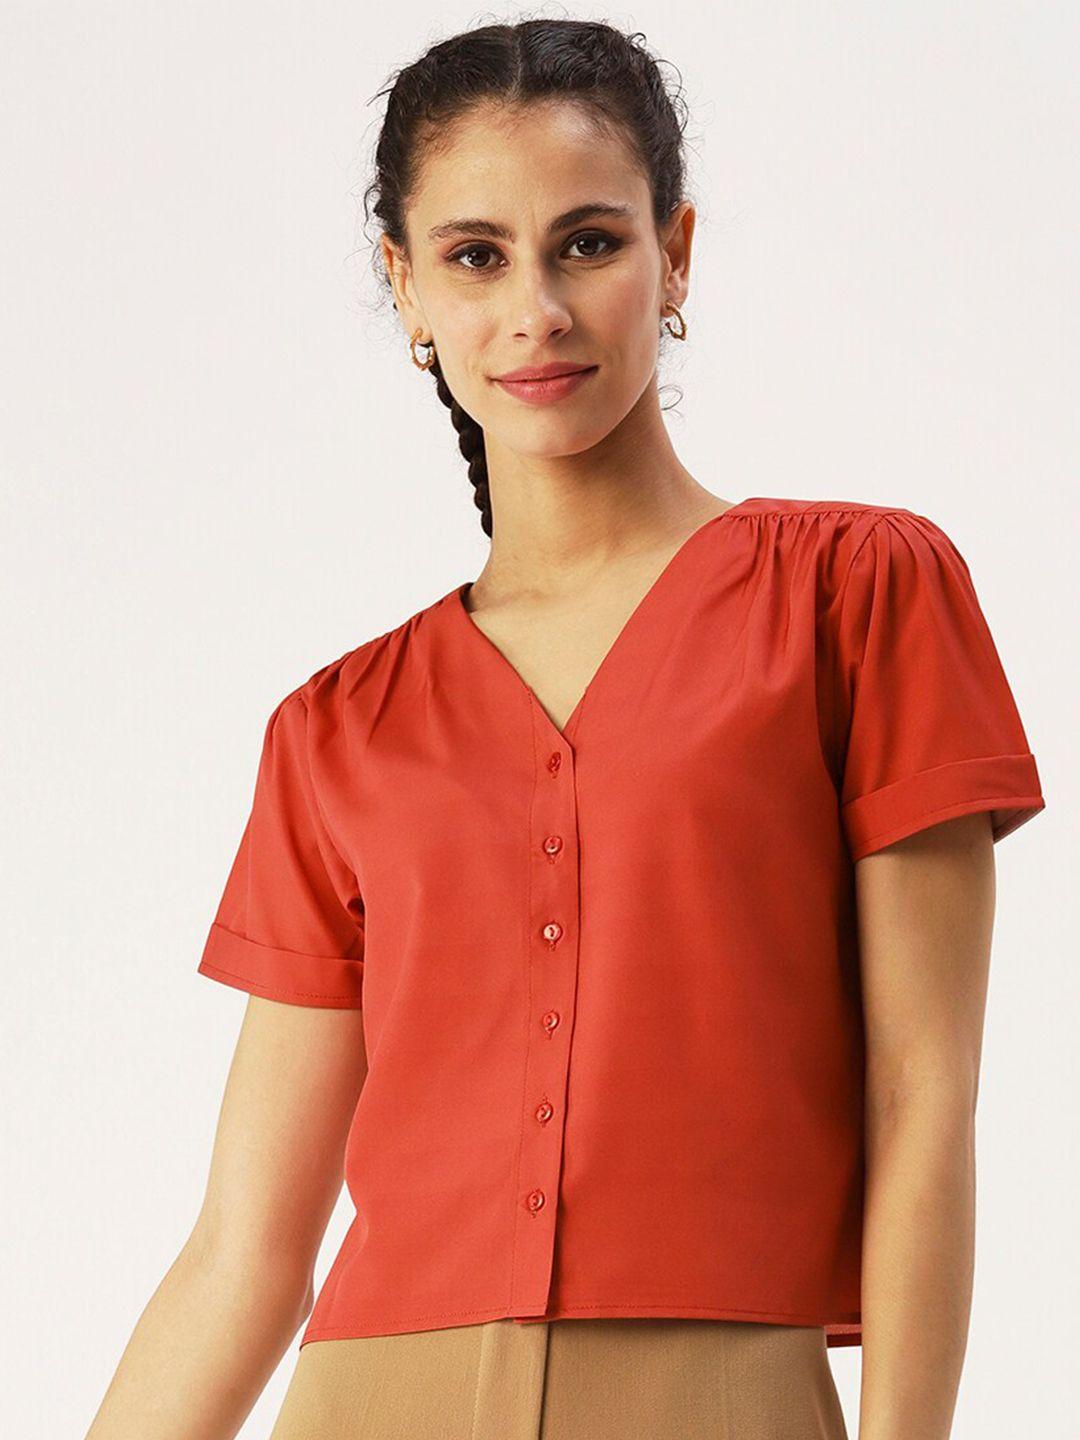 dressberry red shirt style top